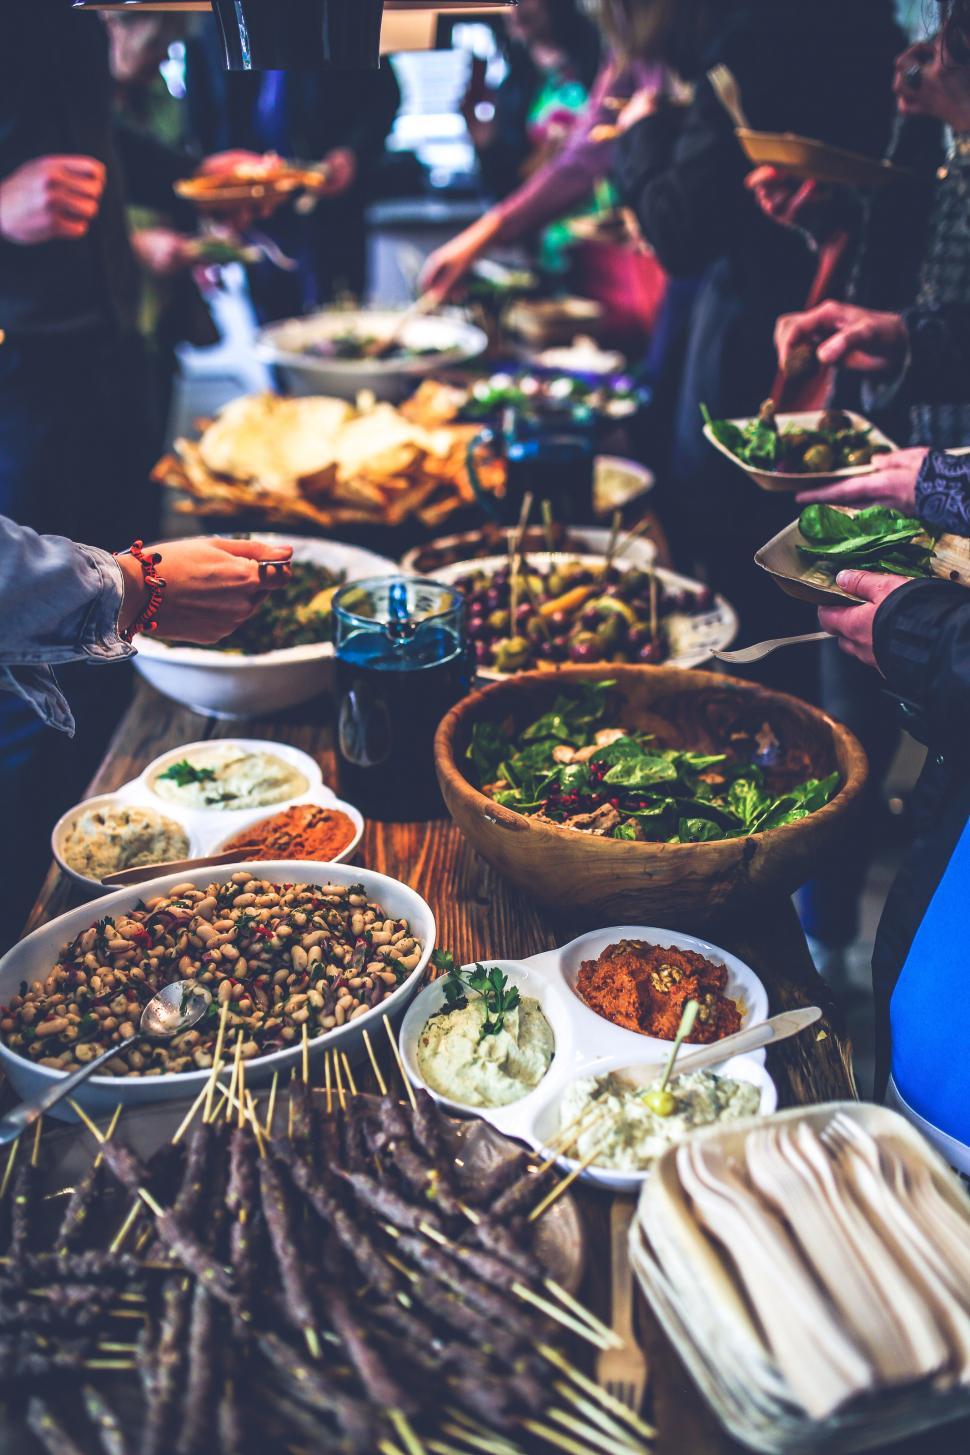 Free Image of Long Table Overflowing With Food 